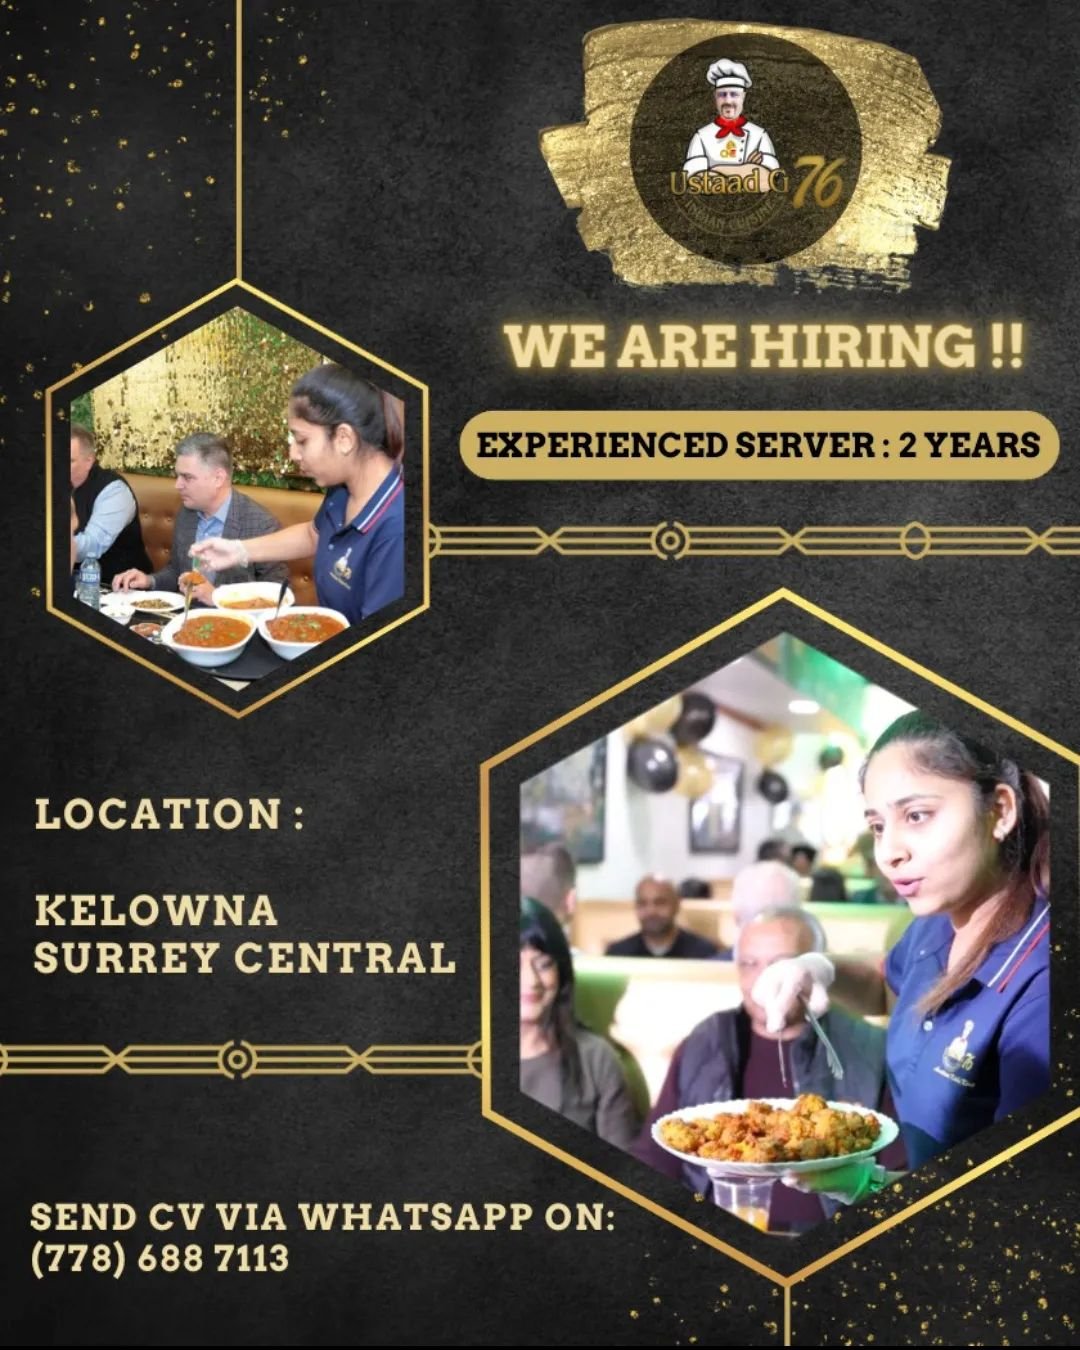 Join our team! 🌟 Experienced servers wanted at our Kelowna &amp; Surrey Central locations. Apply now by sending your CV via WhatsApp to +1 (778) 688-7113. Don't forget to include your image for a personalized touch!

Deadline: Sunday, 28th April 202